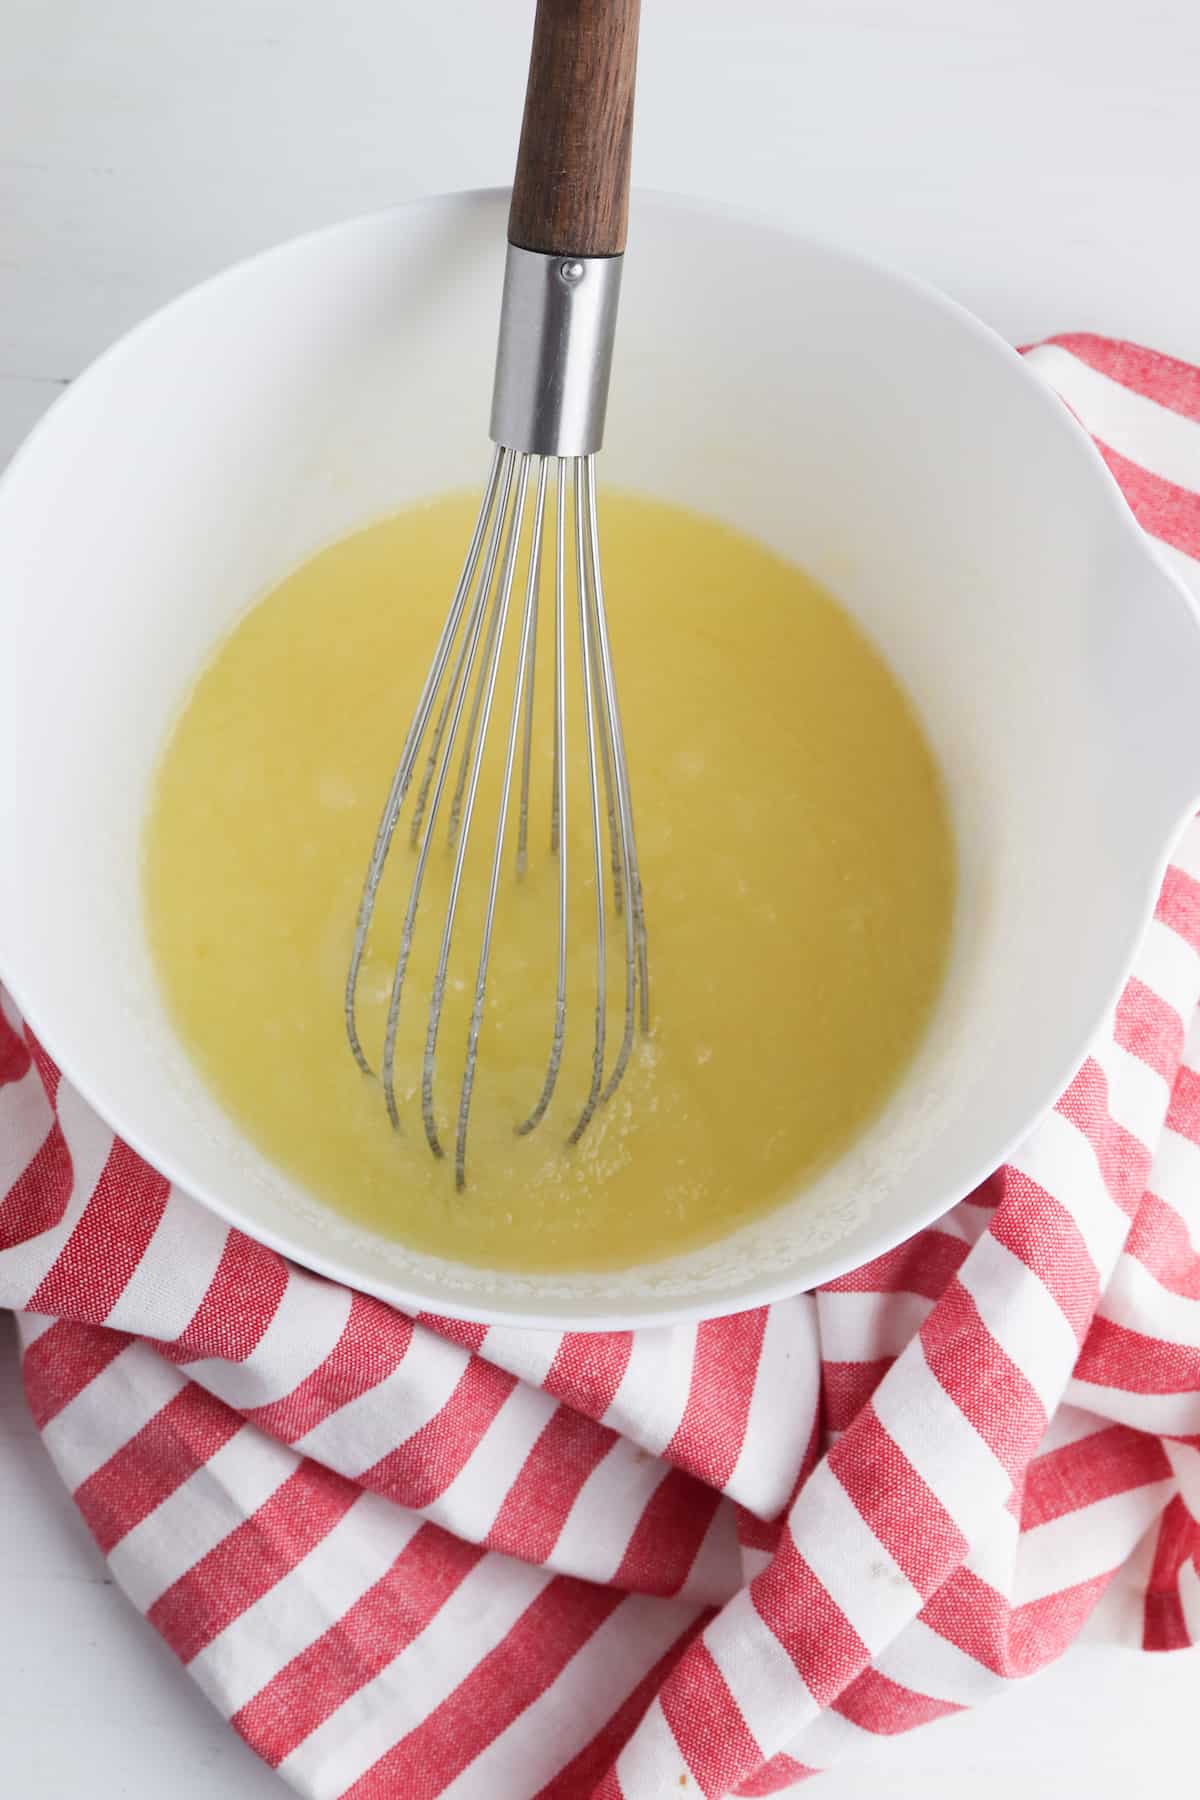 Sugar and butter blended in a white bowl with whisk.